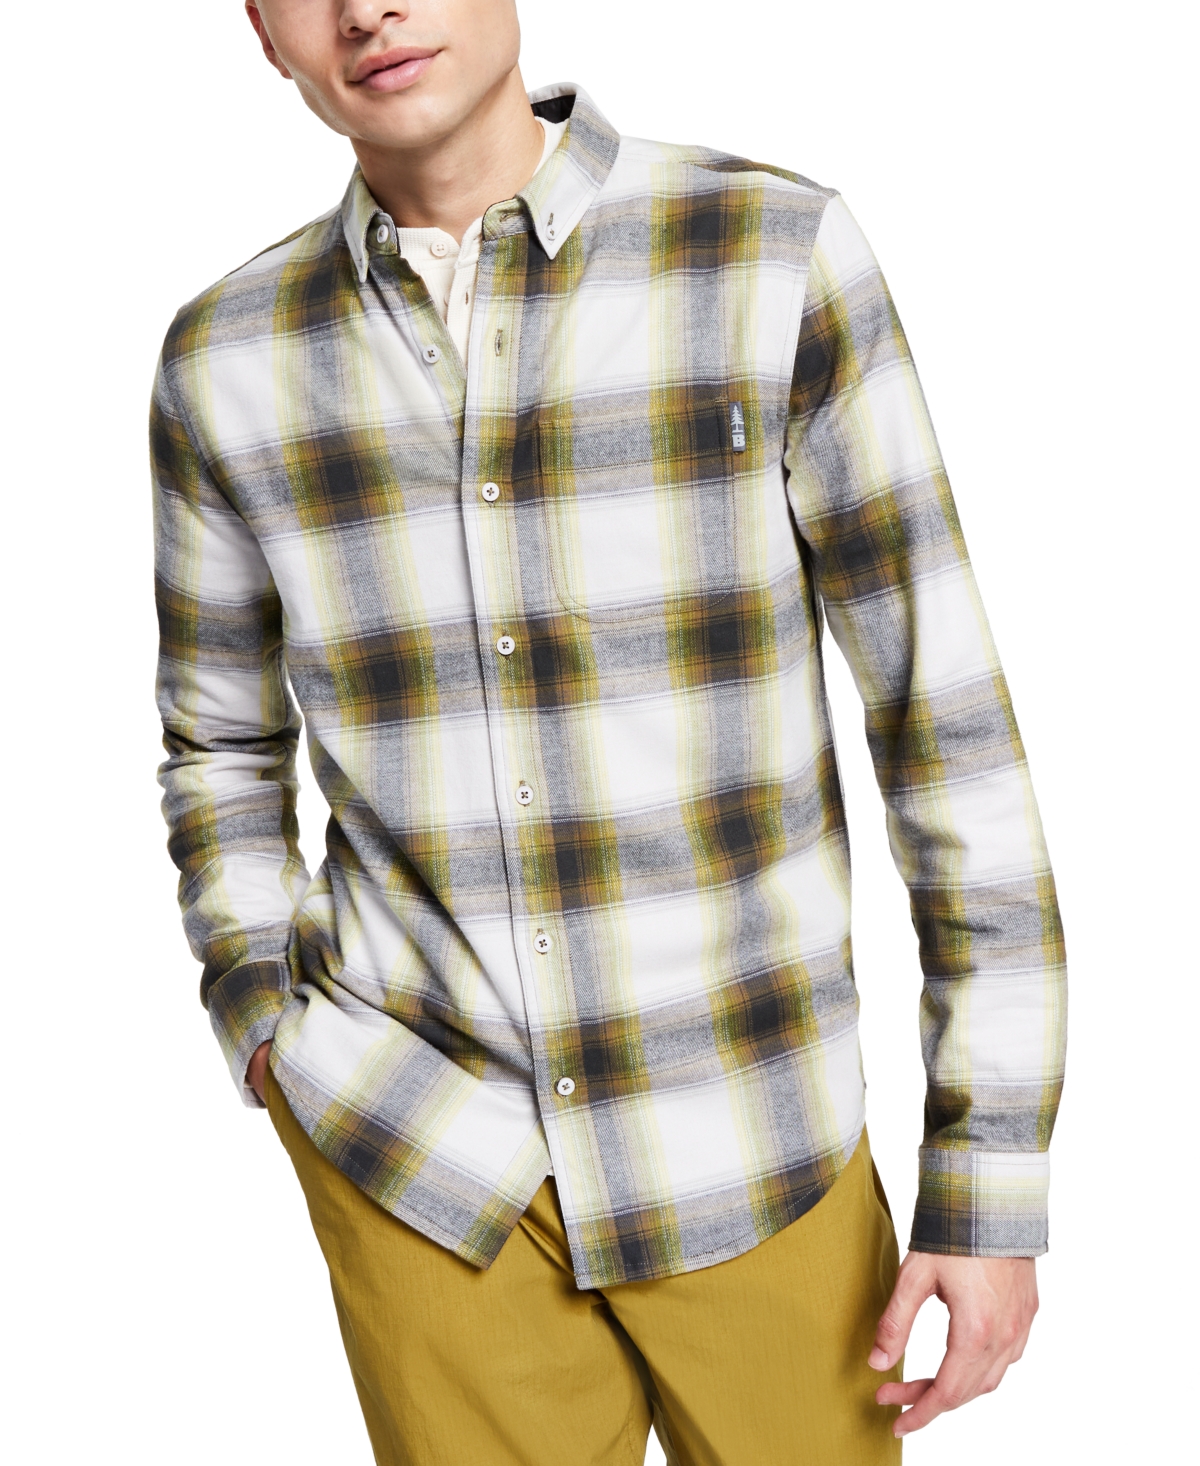 Bass Outdoor Men's Expedition Stretch Flannel Shirt